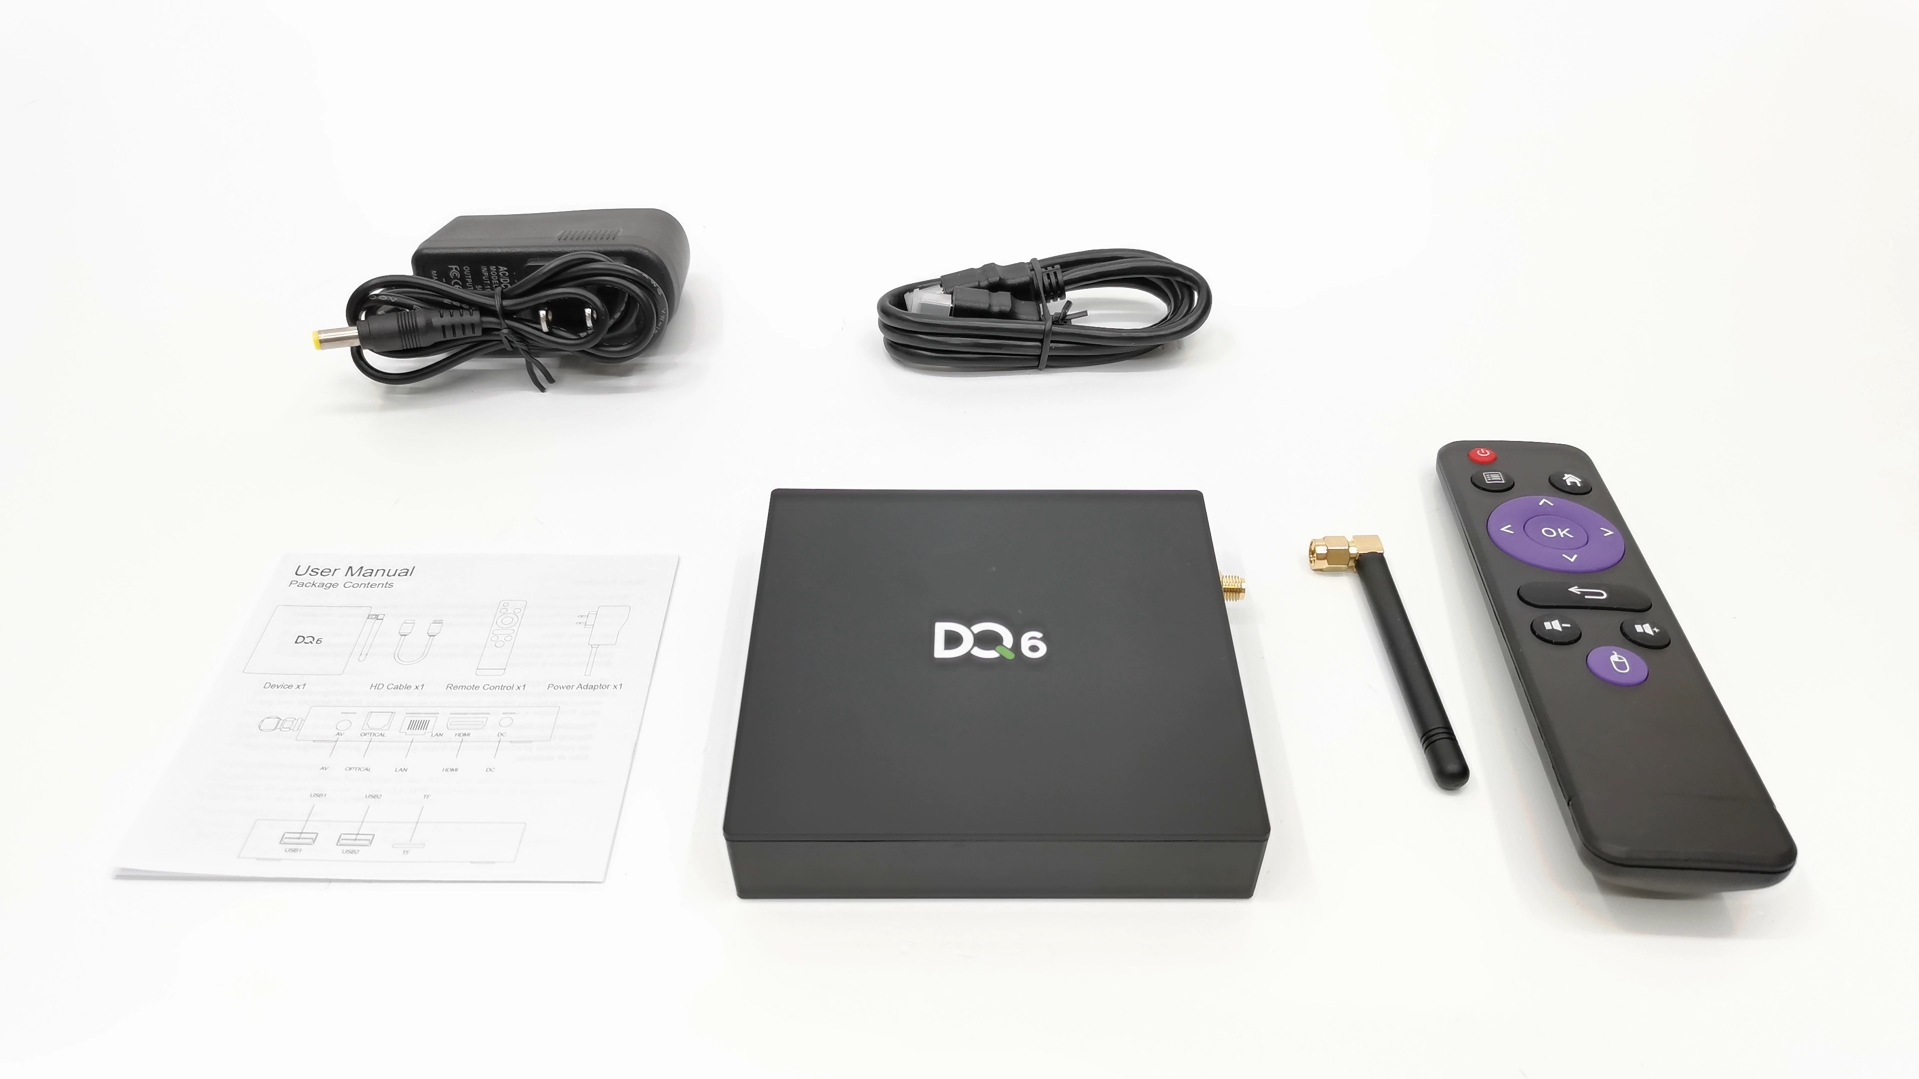 DQ6 TV Box in the box